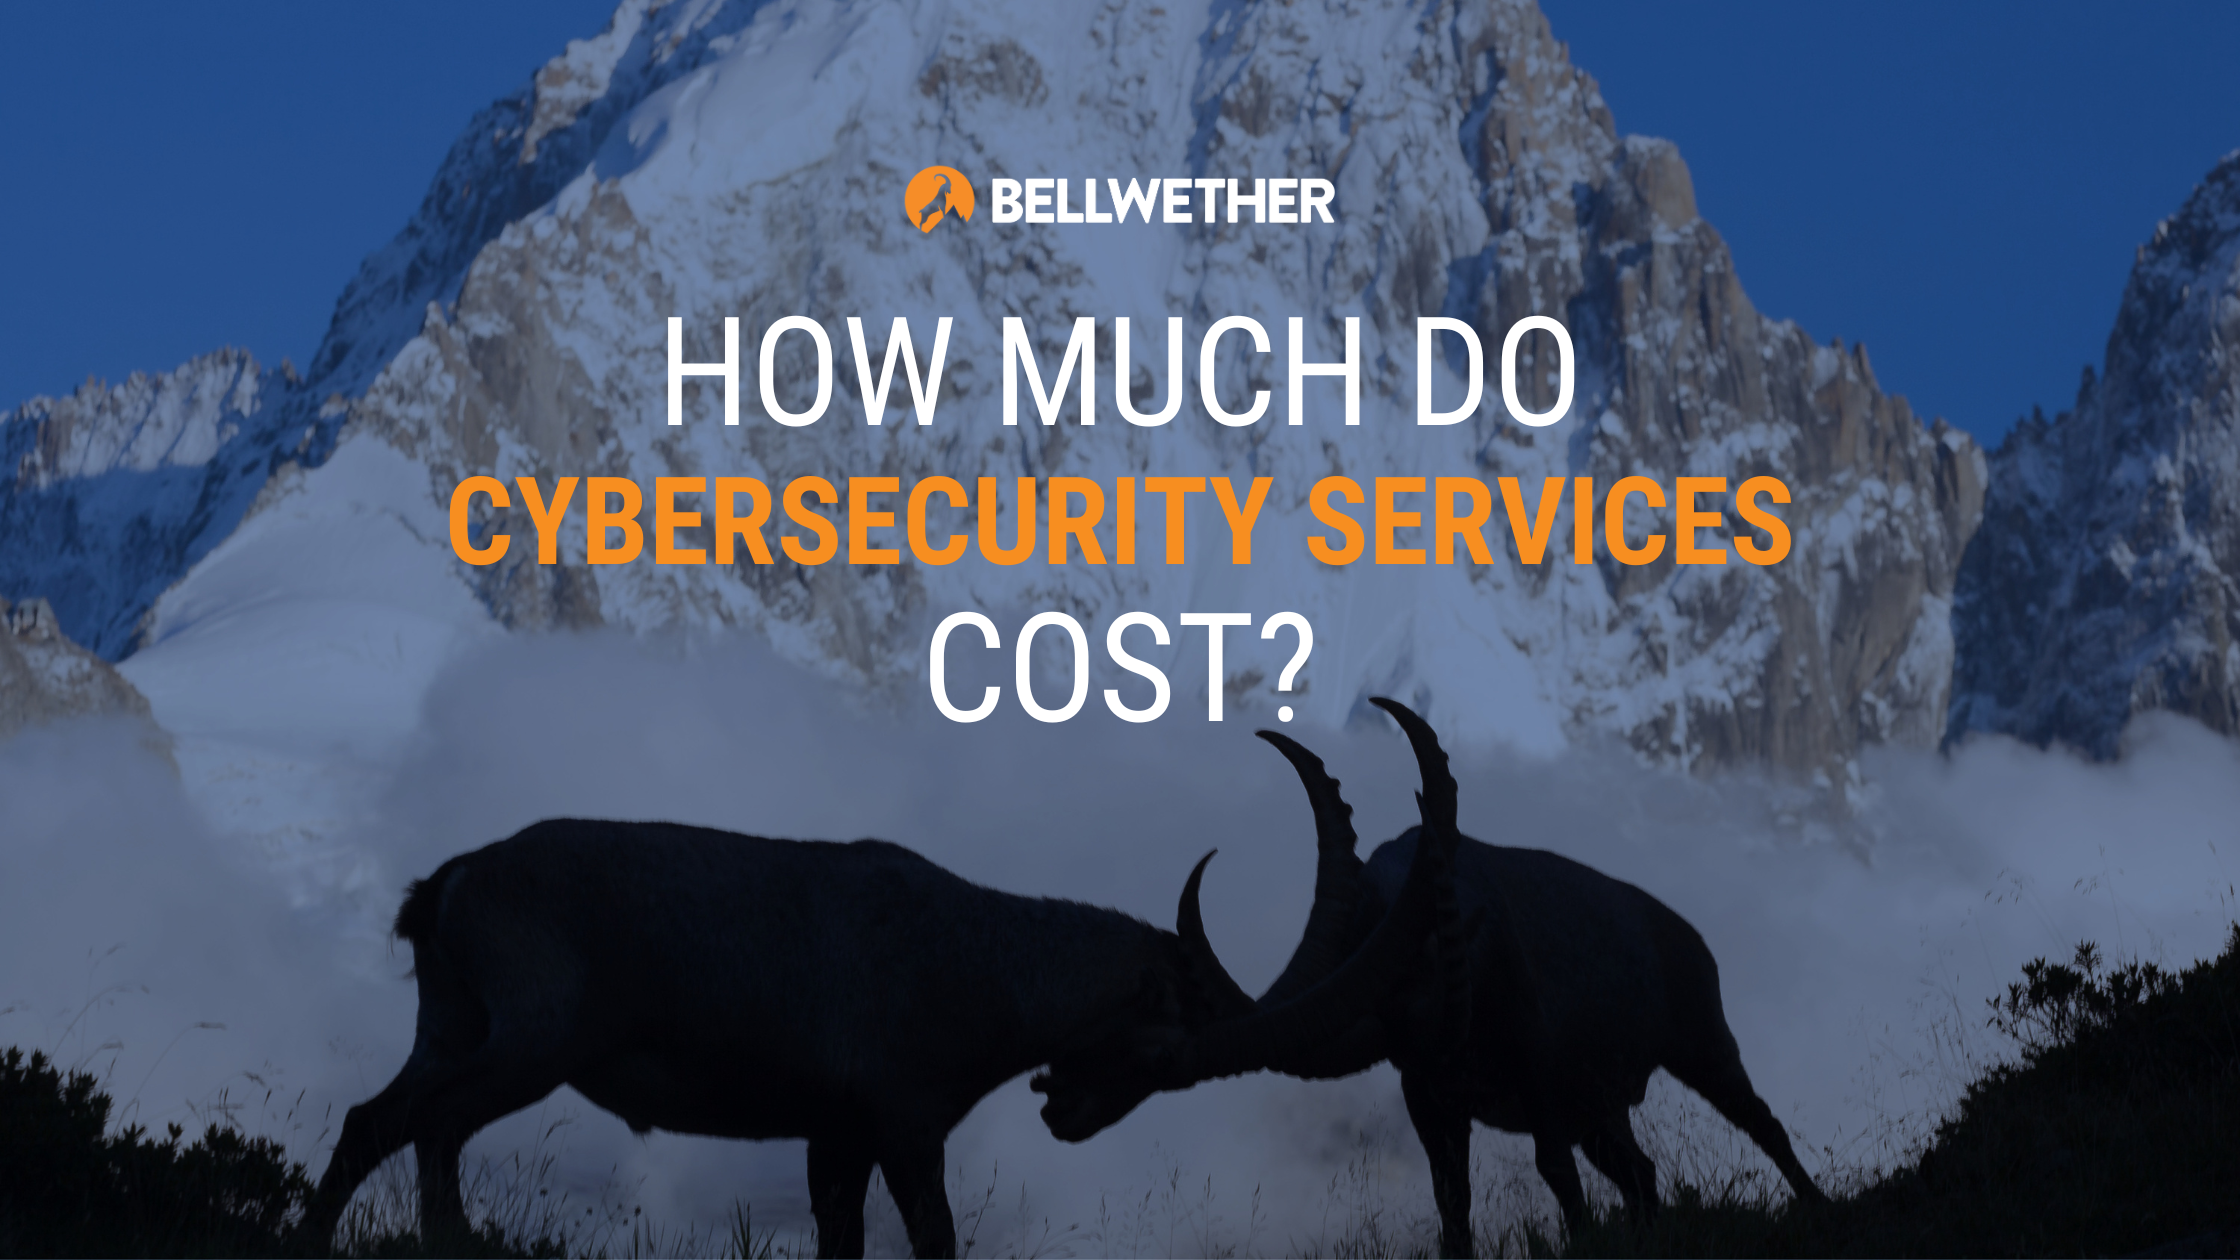 How much do cybersecurity services cost?